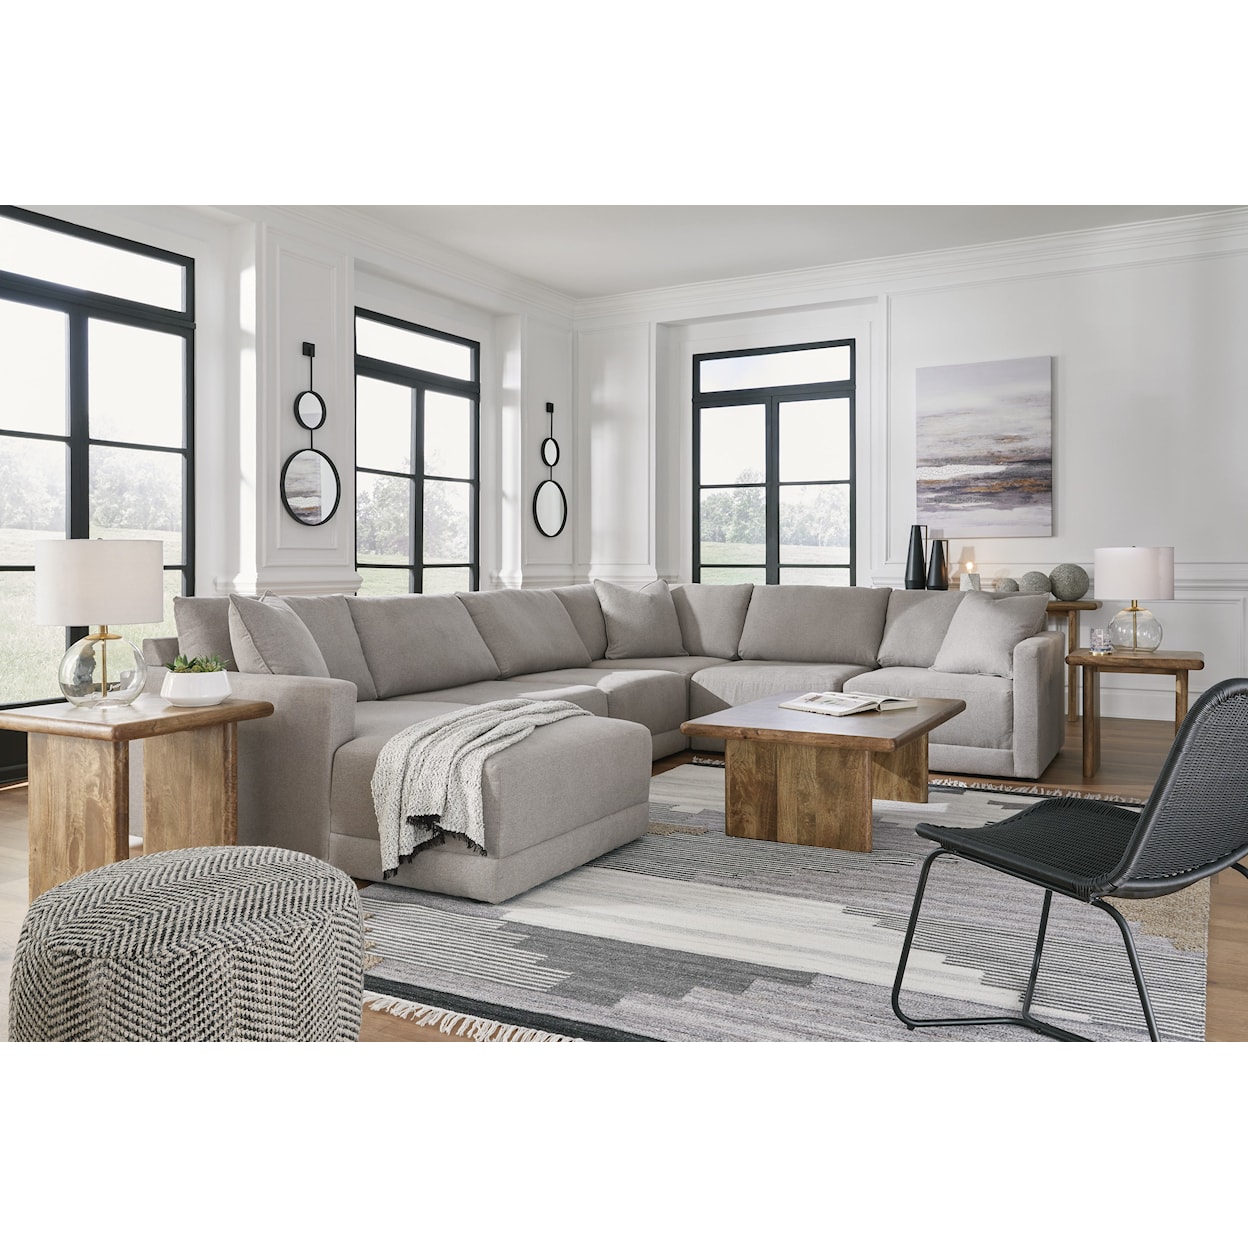 Benchcraft Katany 5 Piece Sectional Sofa with Chaise